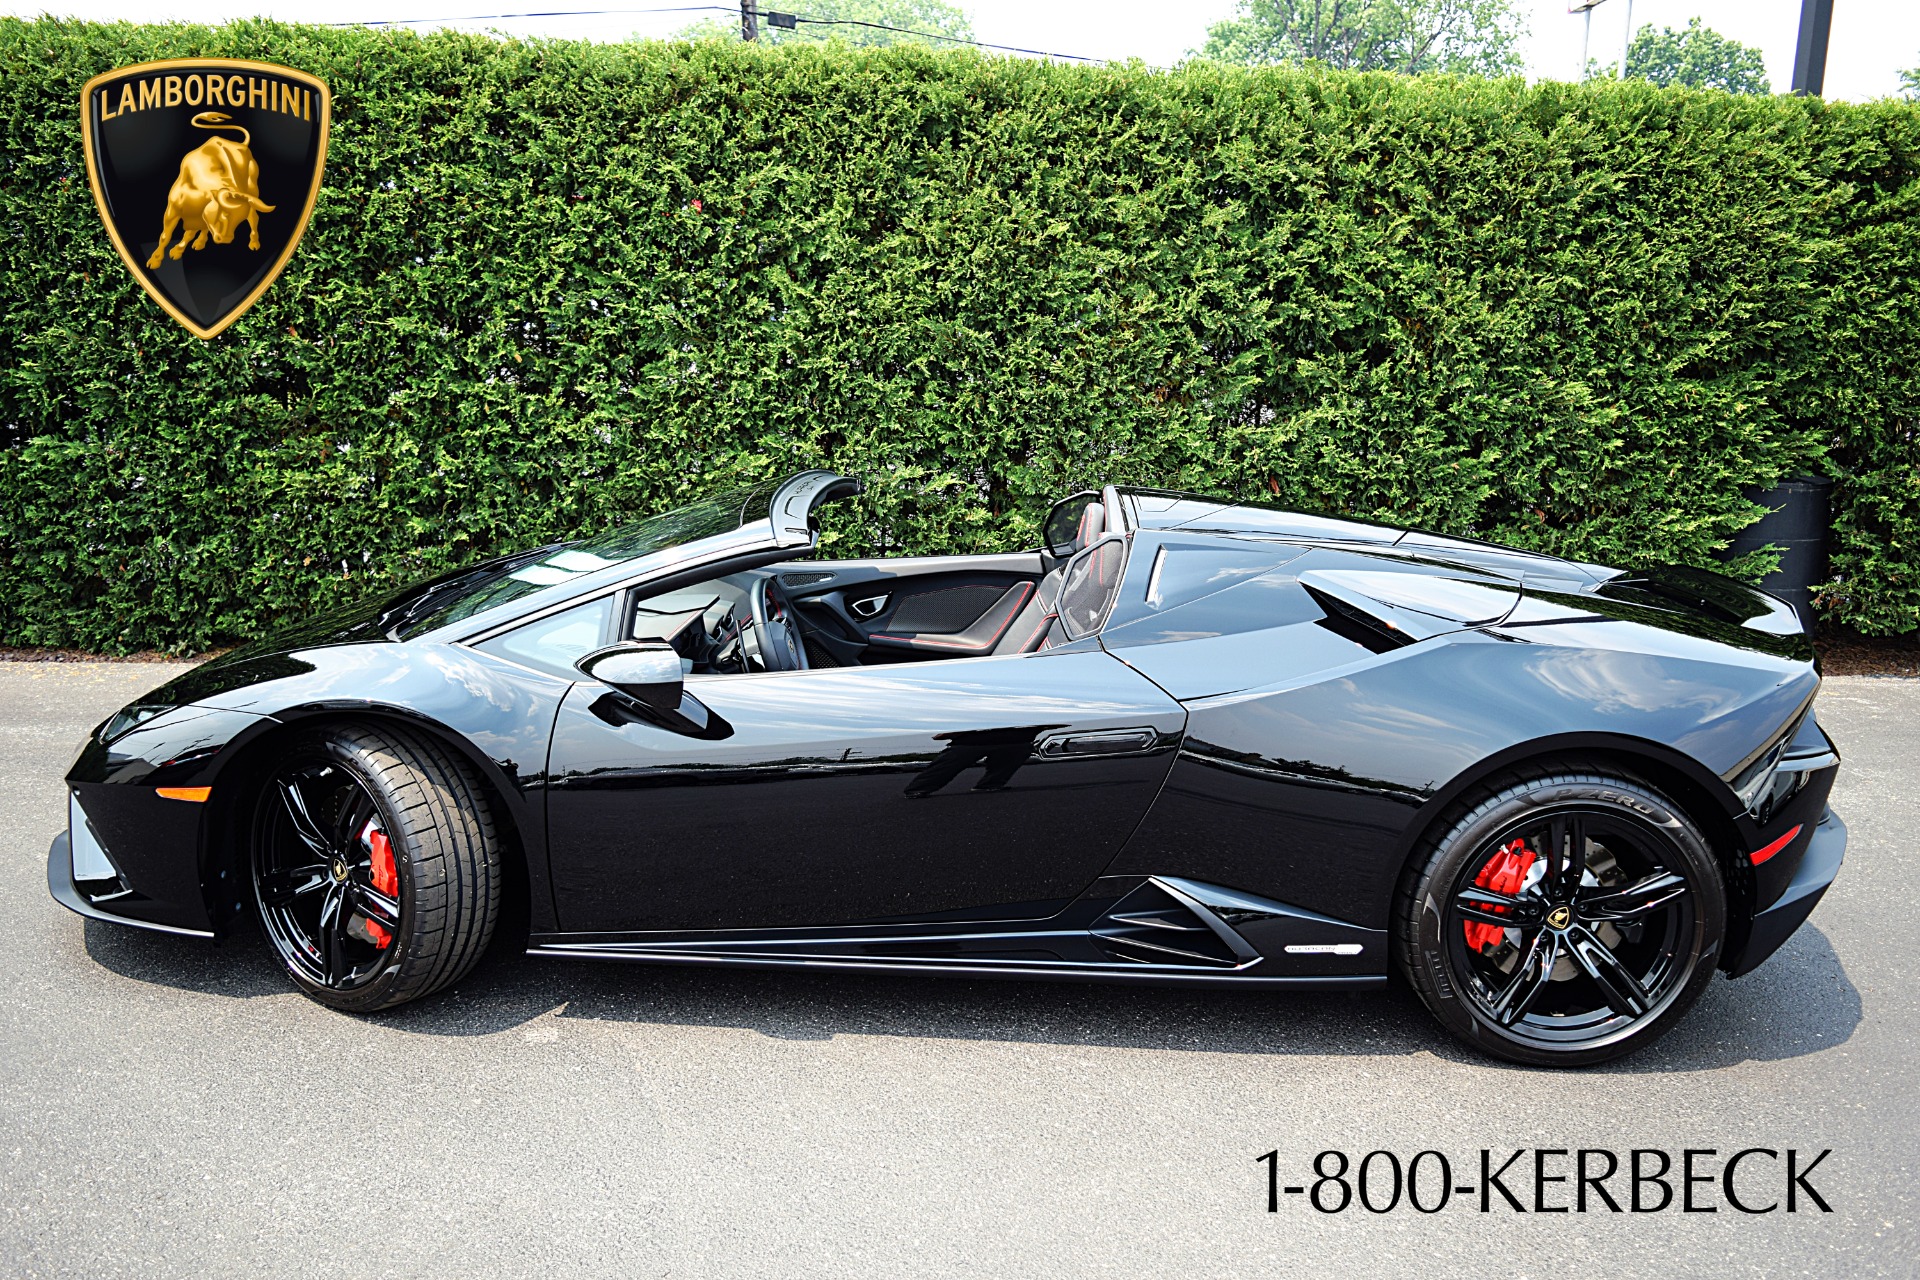 Used 2020 Lamborghini Huracan LP-610-2 EVO Spyder / LEASE OPTIONS AVAILABLE for sale $299,000 at Bentley Palmyra N.J. in Palmyra NJ 08065 2